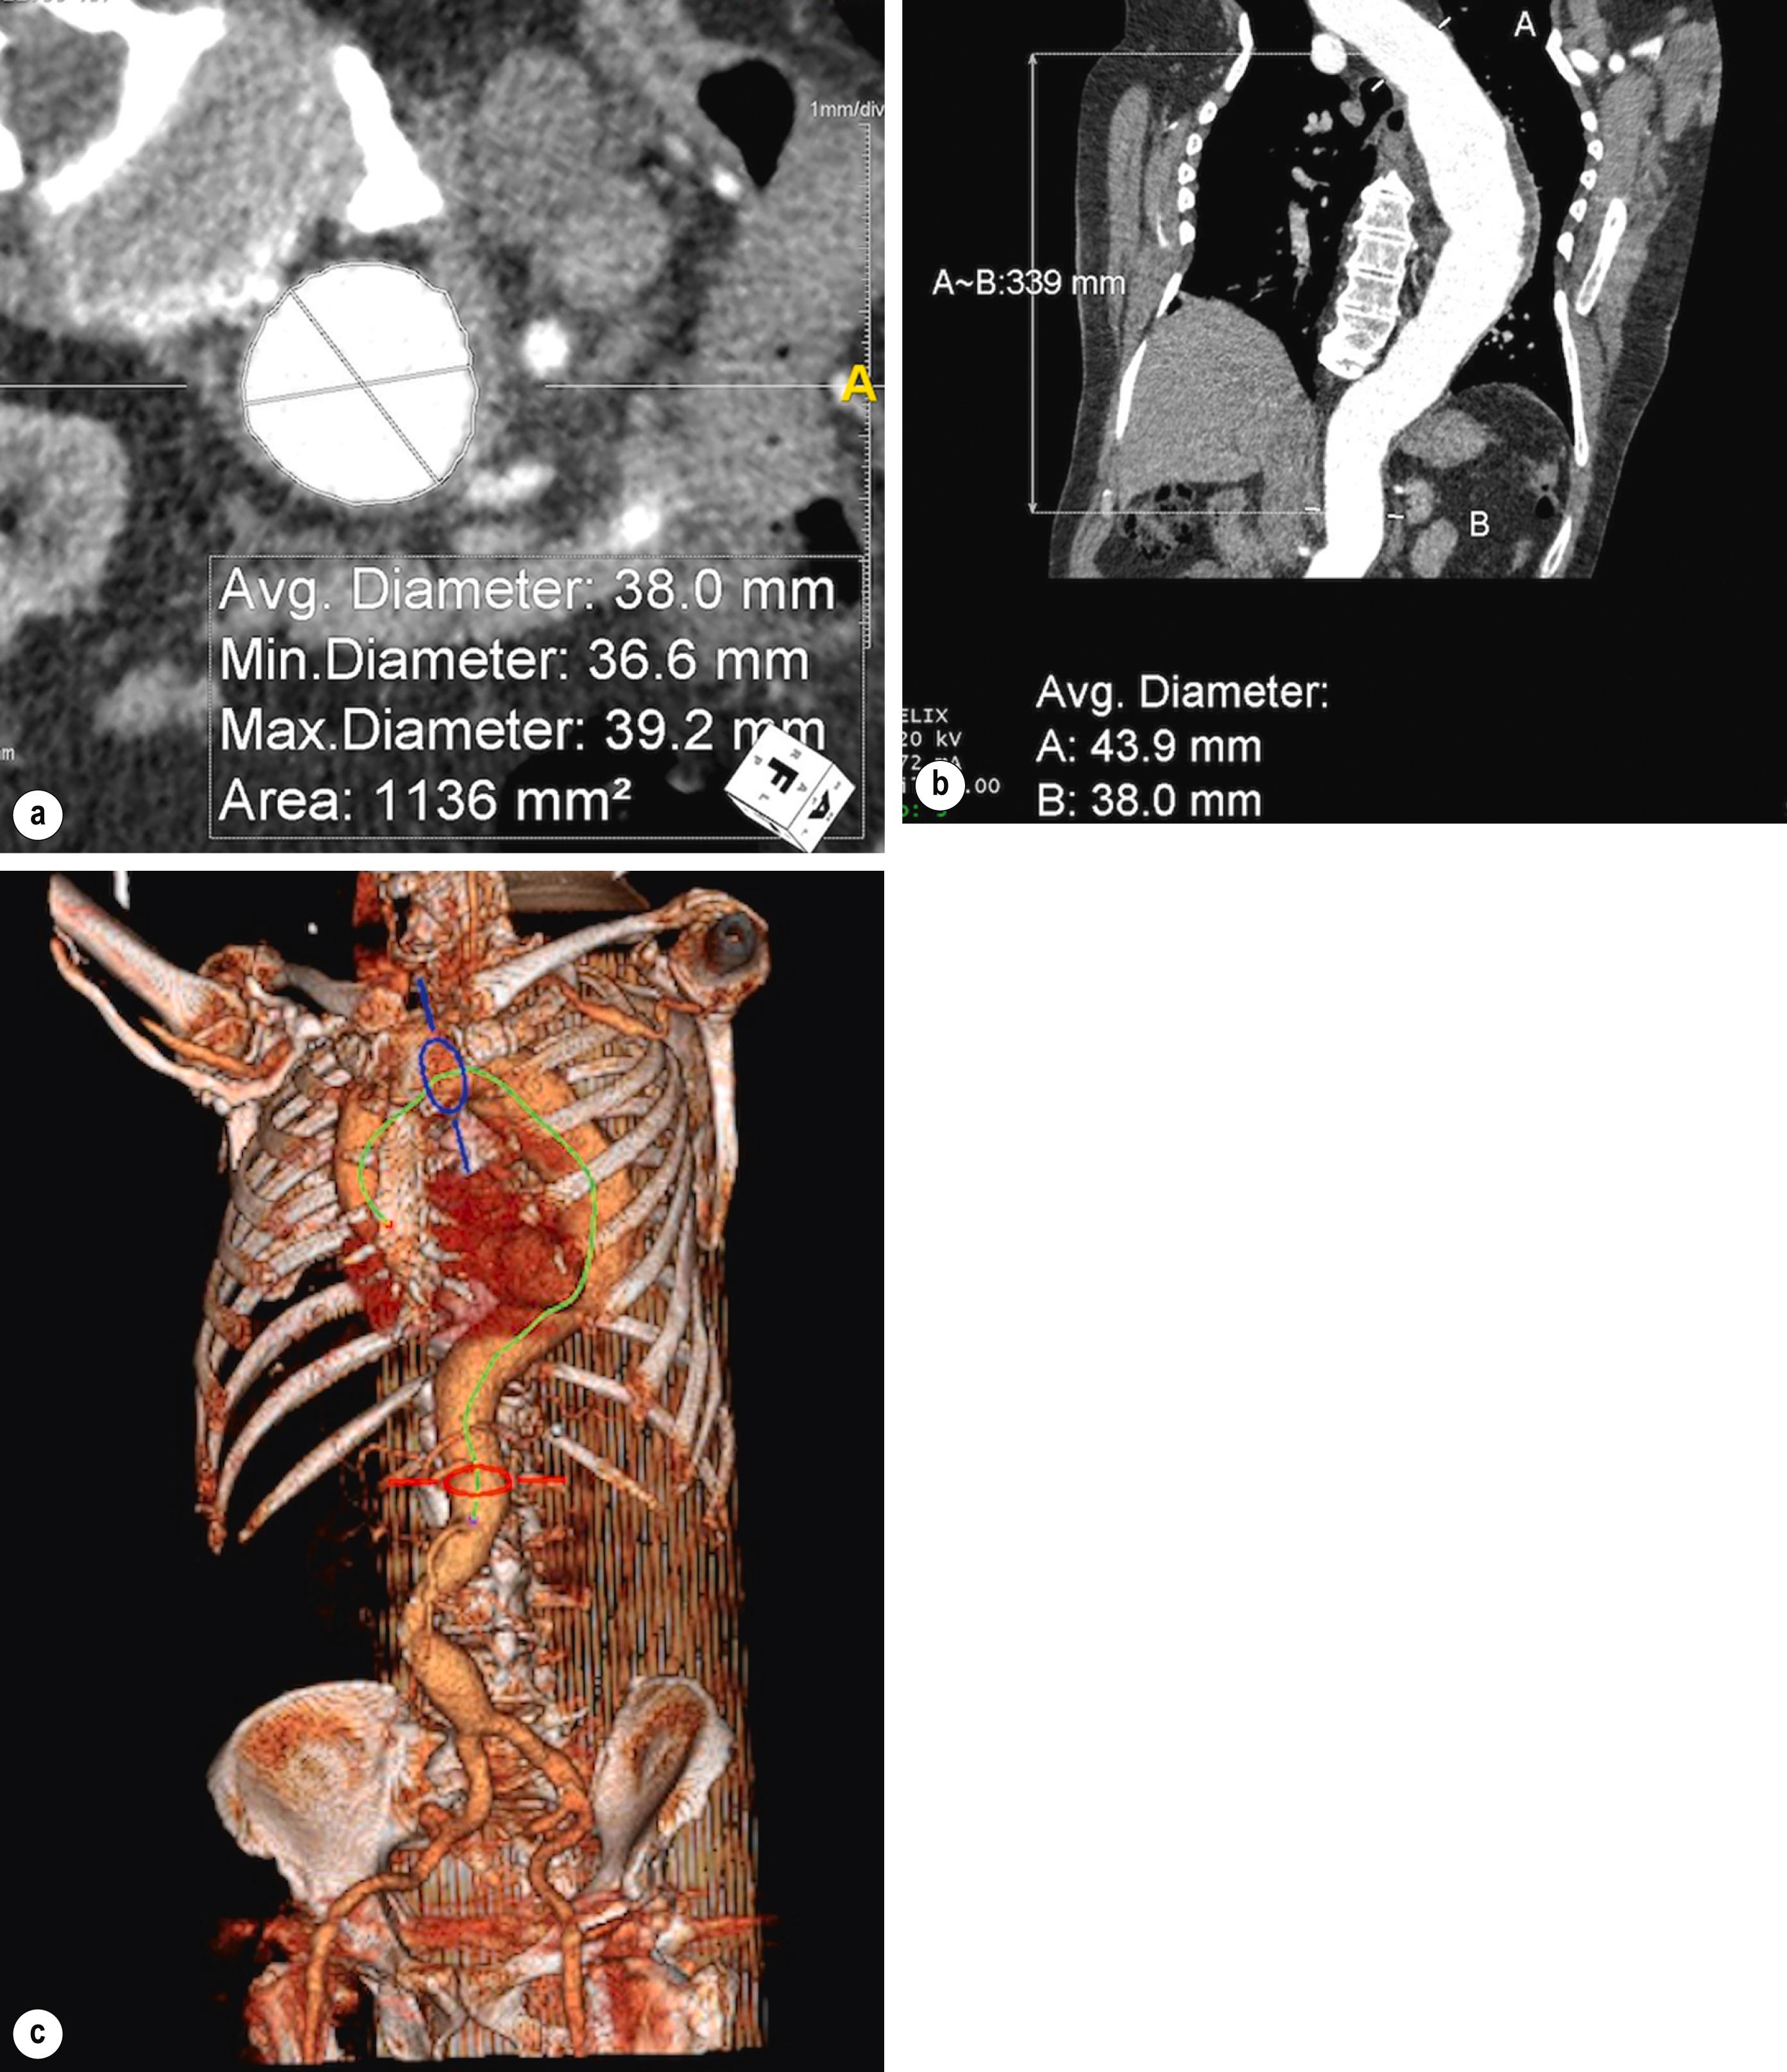 Figure 14.1, Planning thoracic endovascular intervention using images produced by reconstruction of computed tomography angiographic images of the thoracic aorta. This allows more accurate measurements of lengths and diameters, vital when selecting suitable devices (software shown produced by Terarecon, CA, USA).